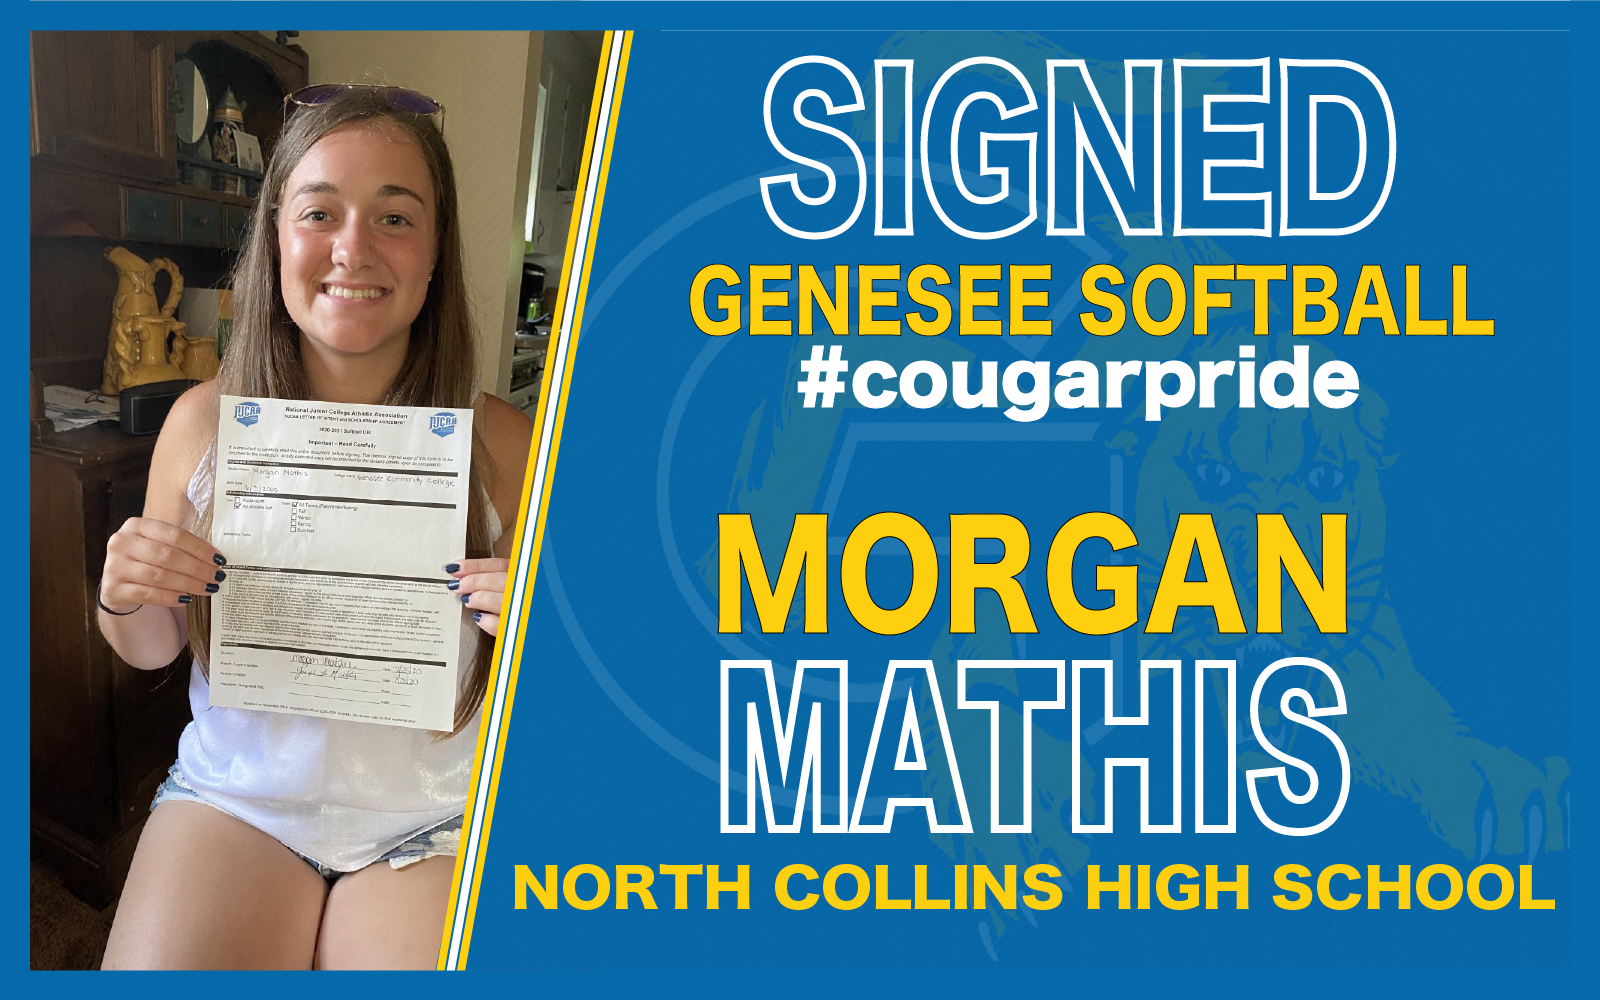 Morgan Mathis has signed her letter of intent to join the Genesee Softball program